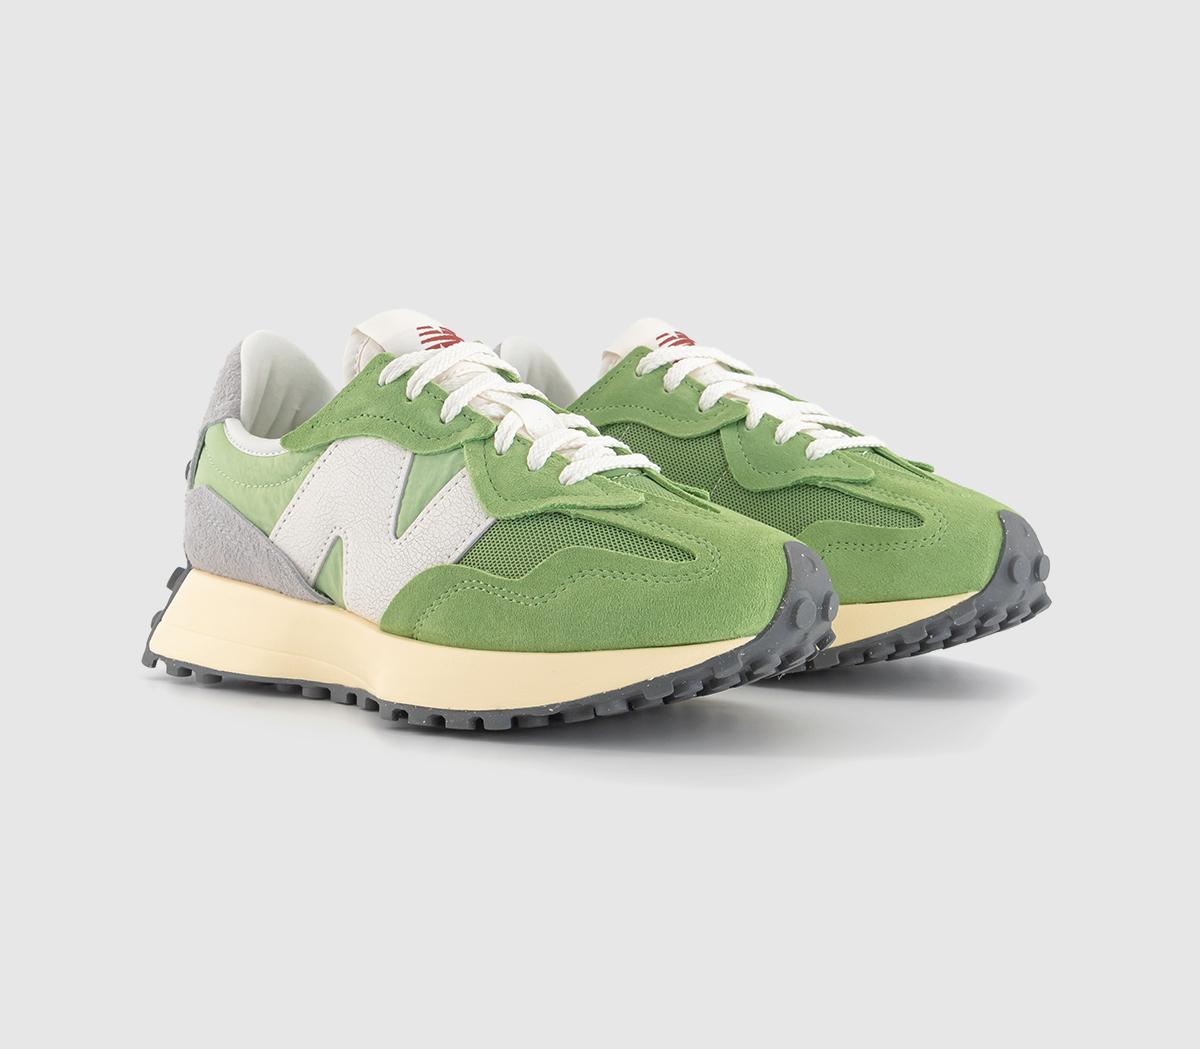 New Balance Mens 327 Trainers Chive Green/White/Grey, 7.5